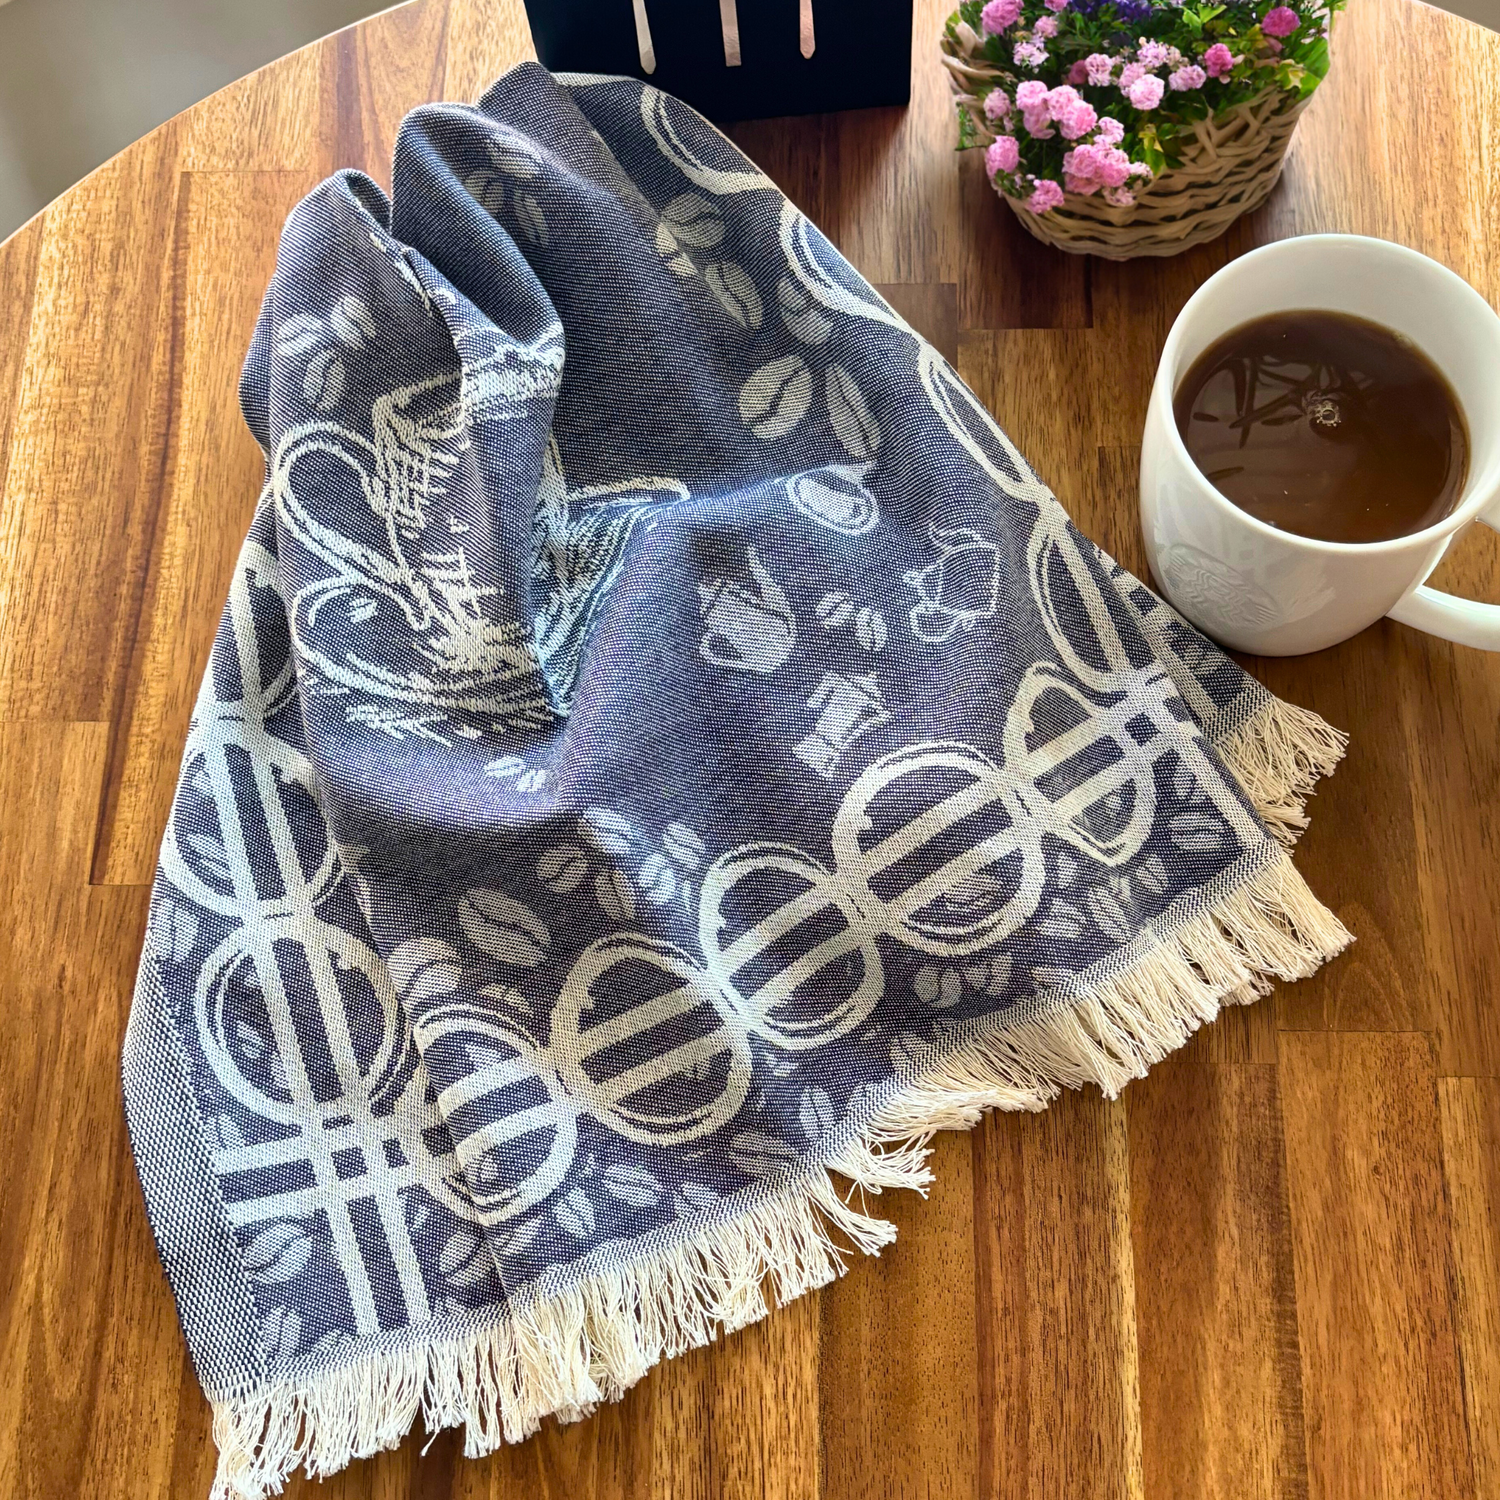 COFFEE Turkish Kitchen Towel with intricate coffee-themed patterns is draped on a wooden table next to a cup of coffee and a small flower basket